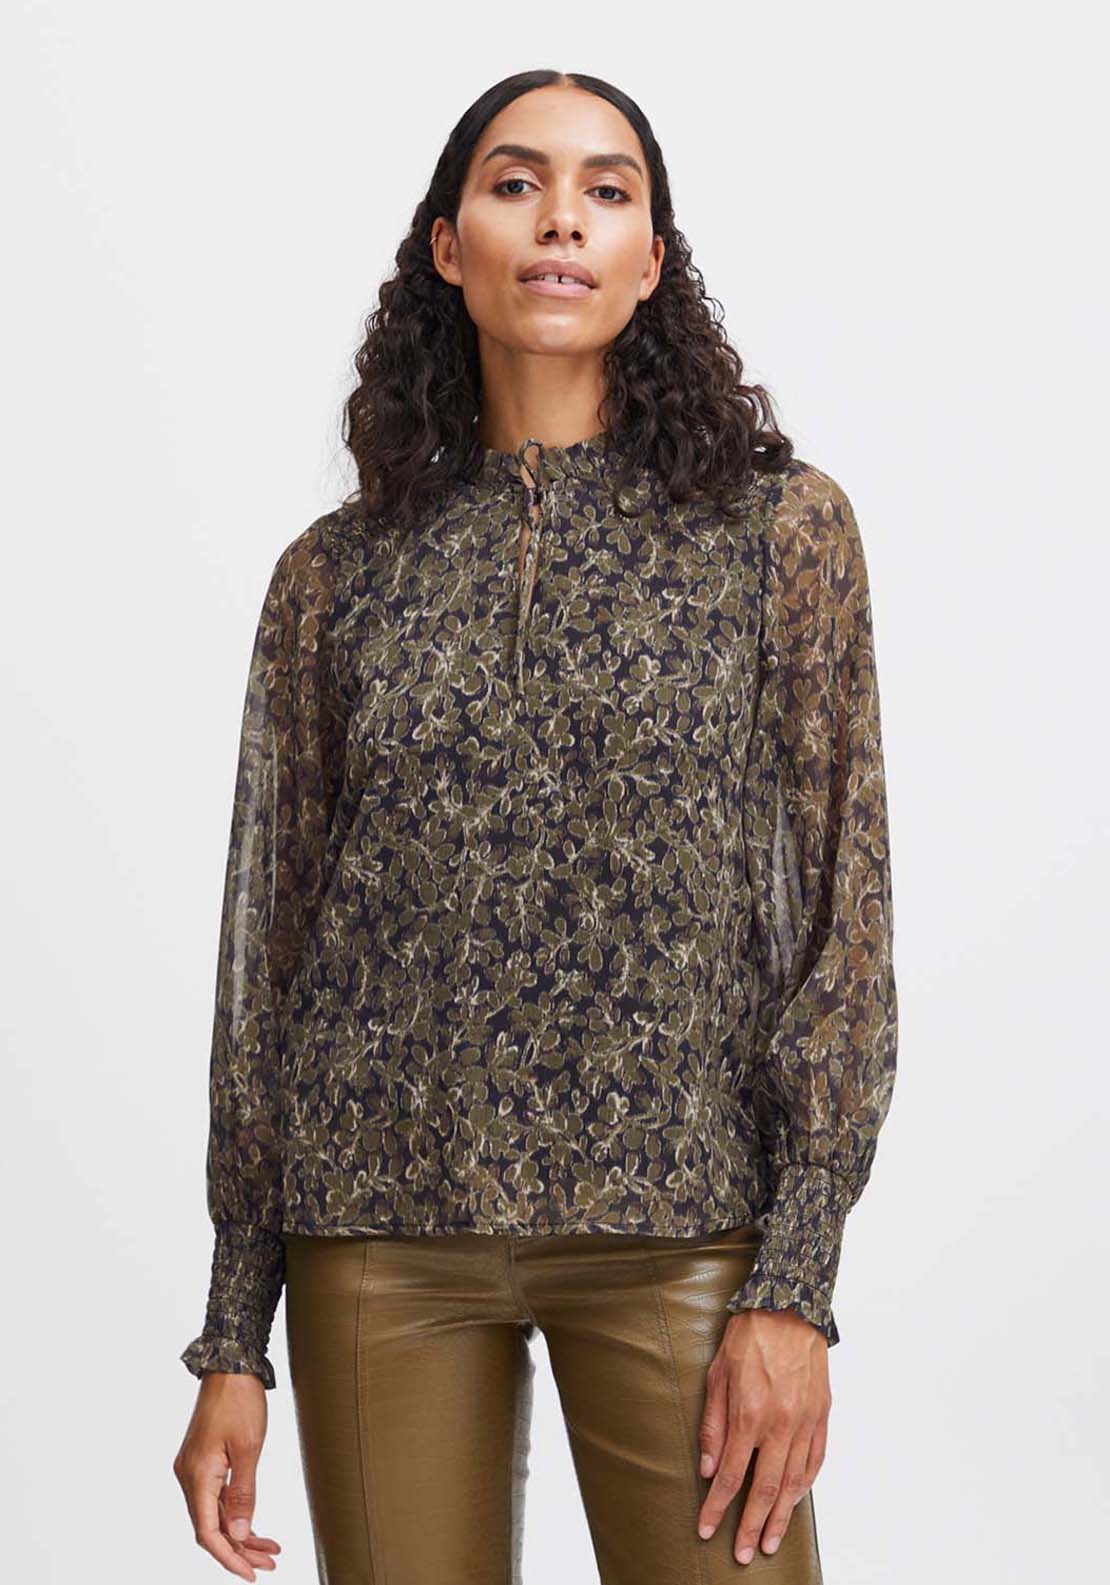 B. Young Hima Blouse 1 Shaws Department Stores